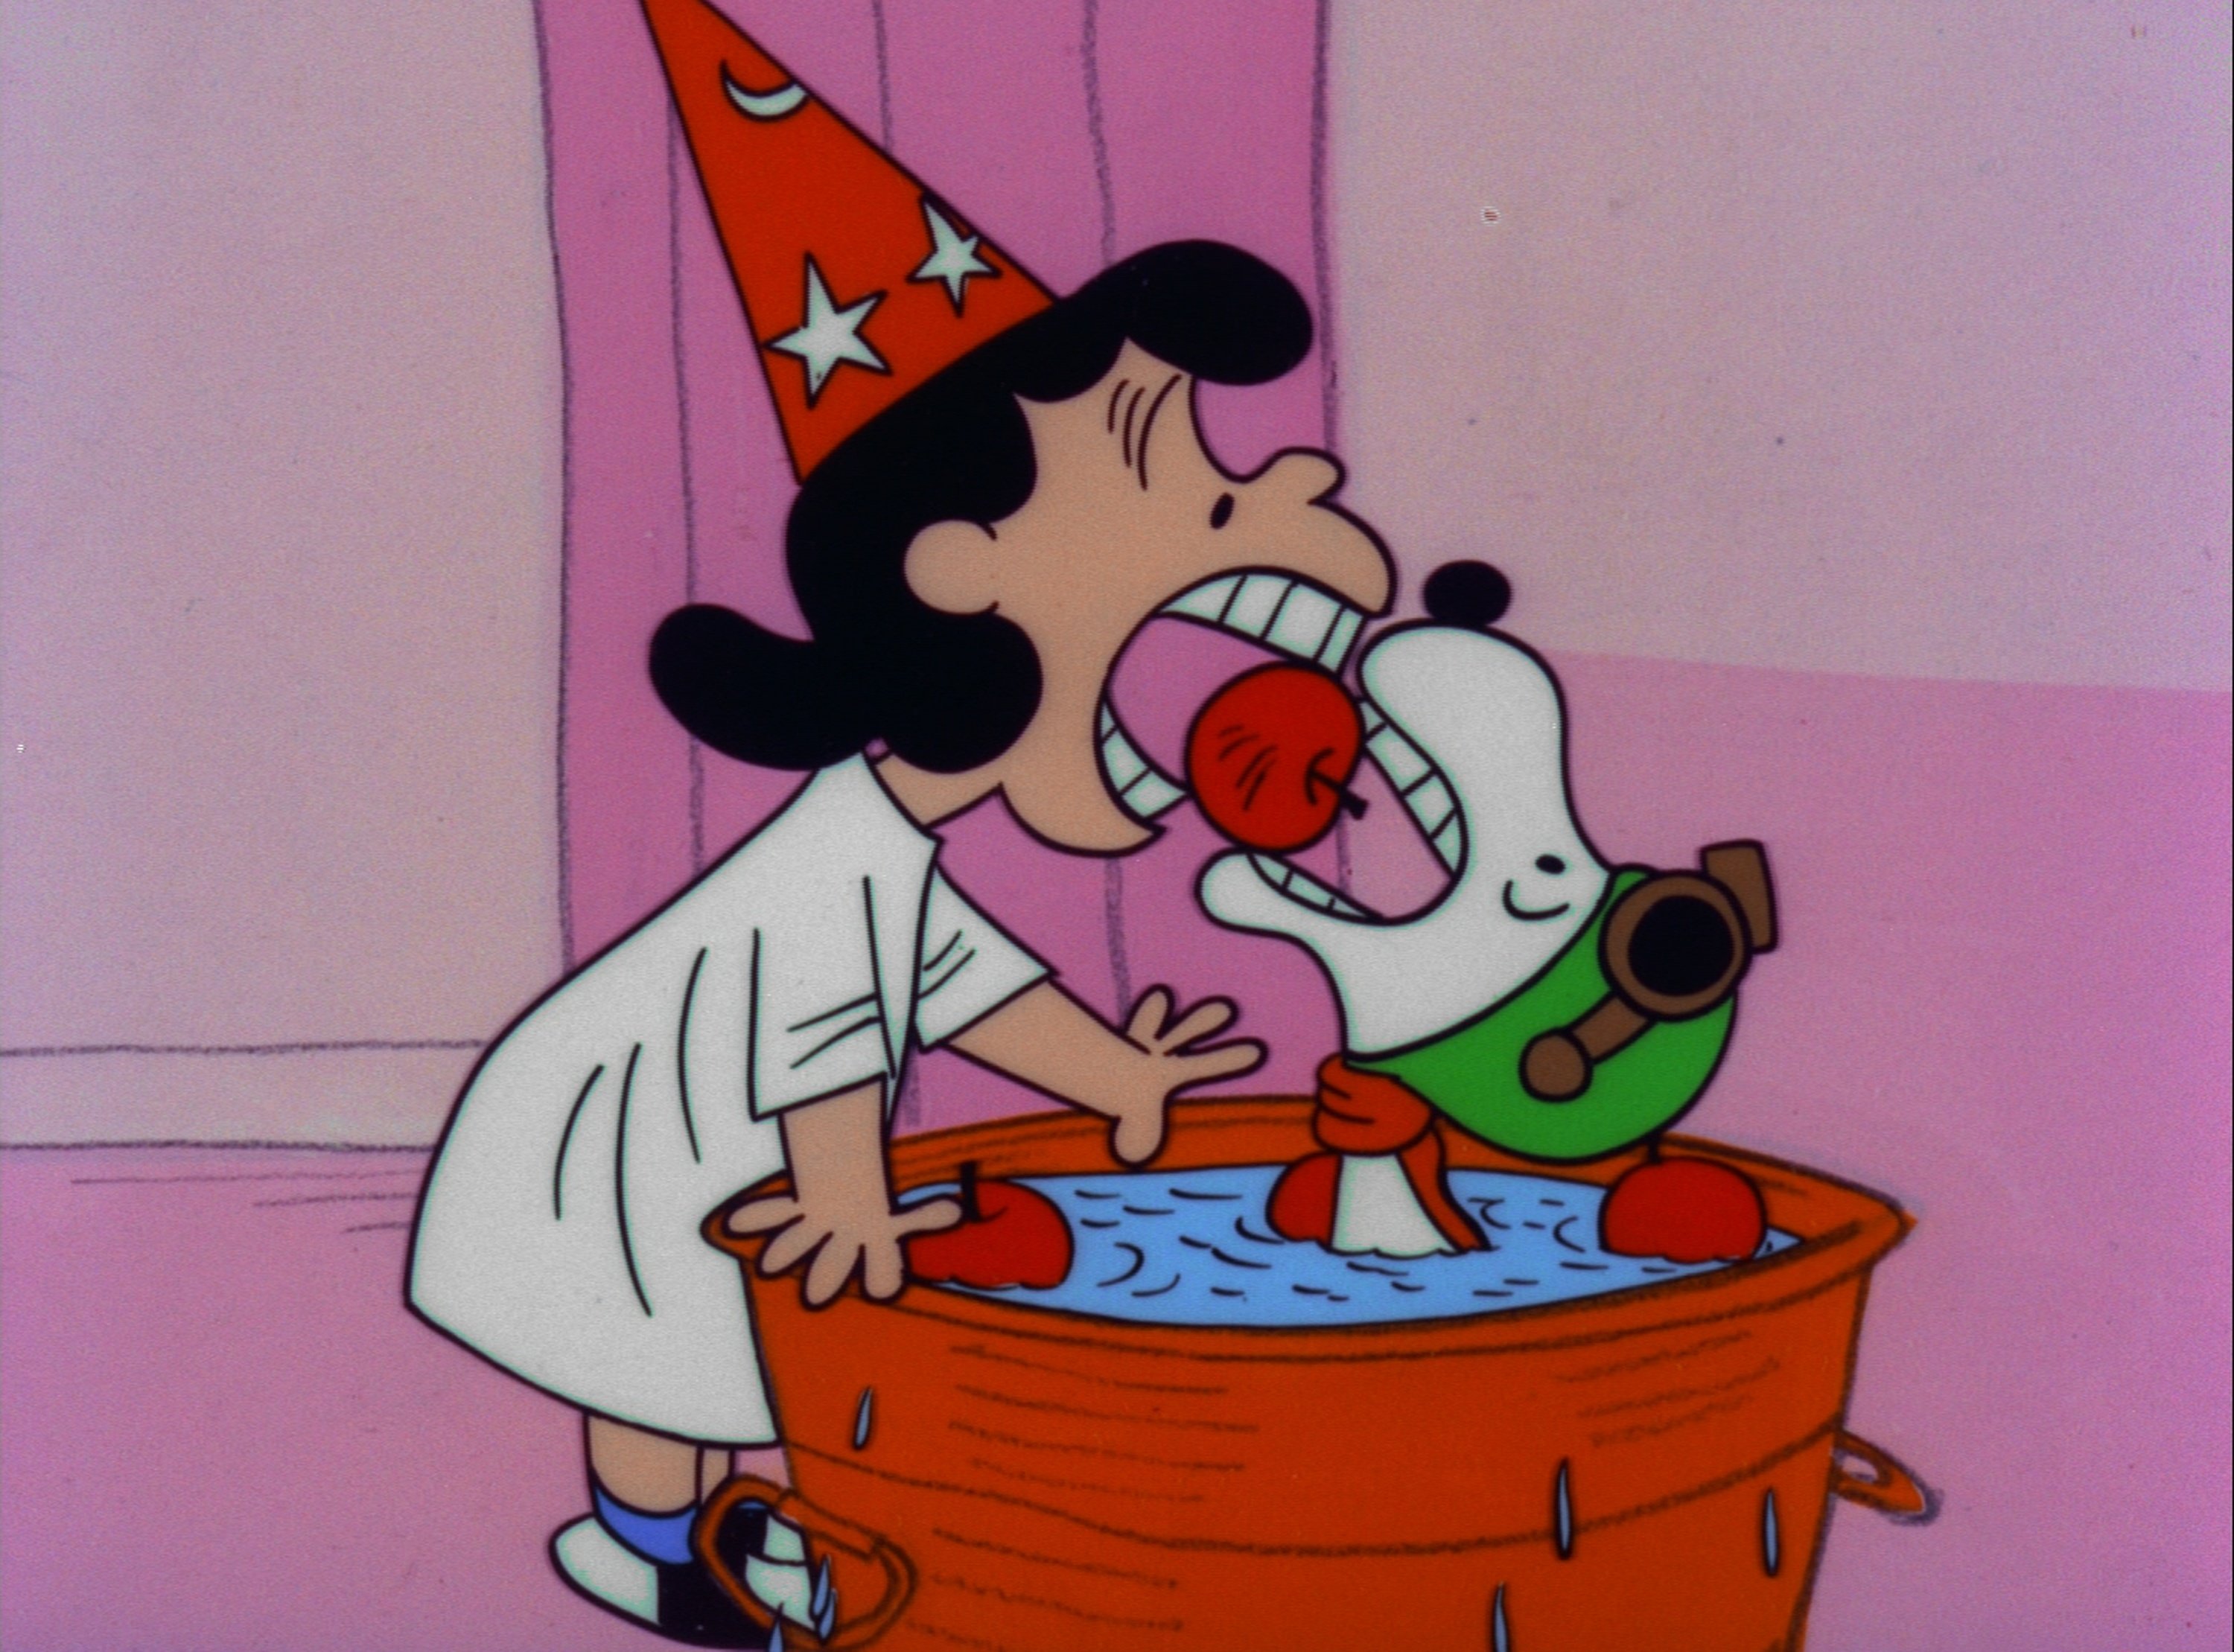 Lucy and Snoopy bite into the same apple